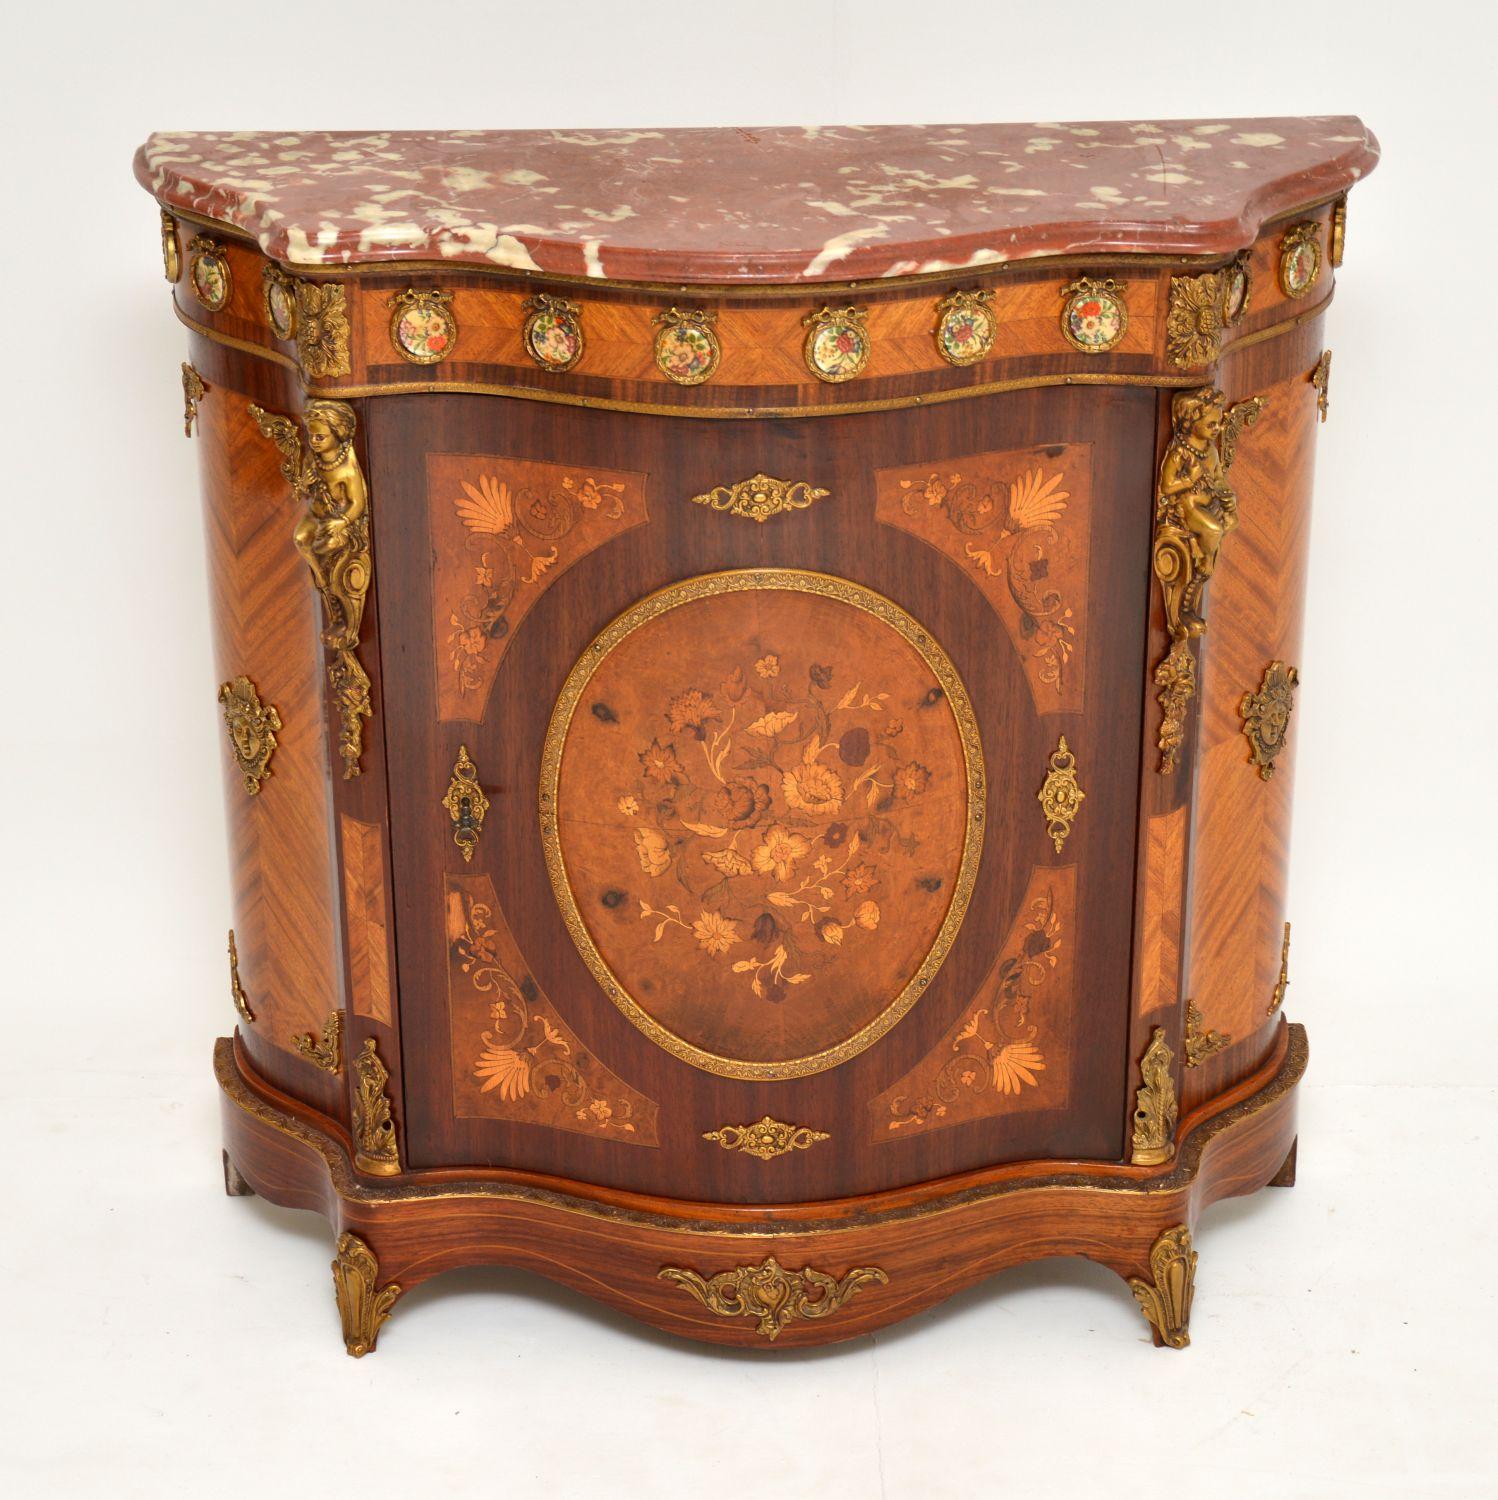 This antique French style marble top cabinet has lovely small proportions and is in very good condition, dating from circa 1930s period.

It has a serpentine shaped front and many colourful different woods, like Kingwood, rosewood, satinwood,